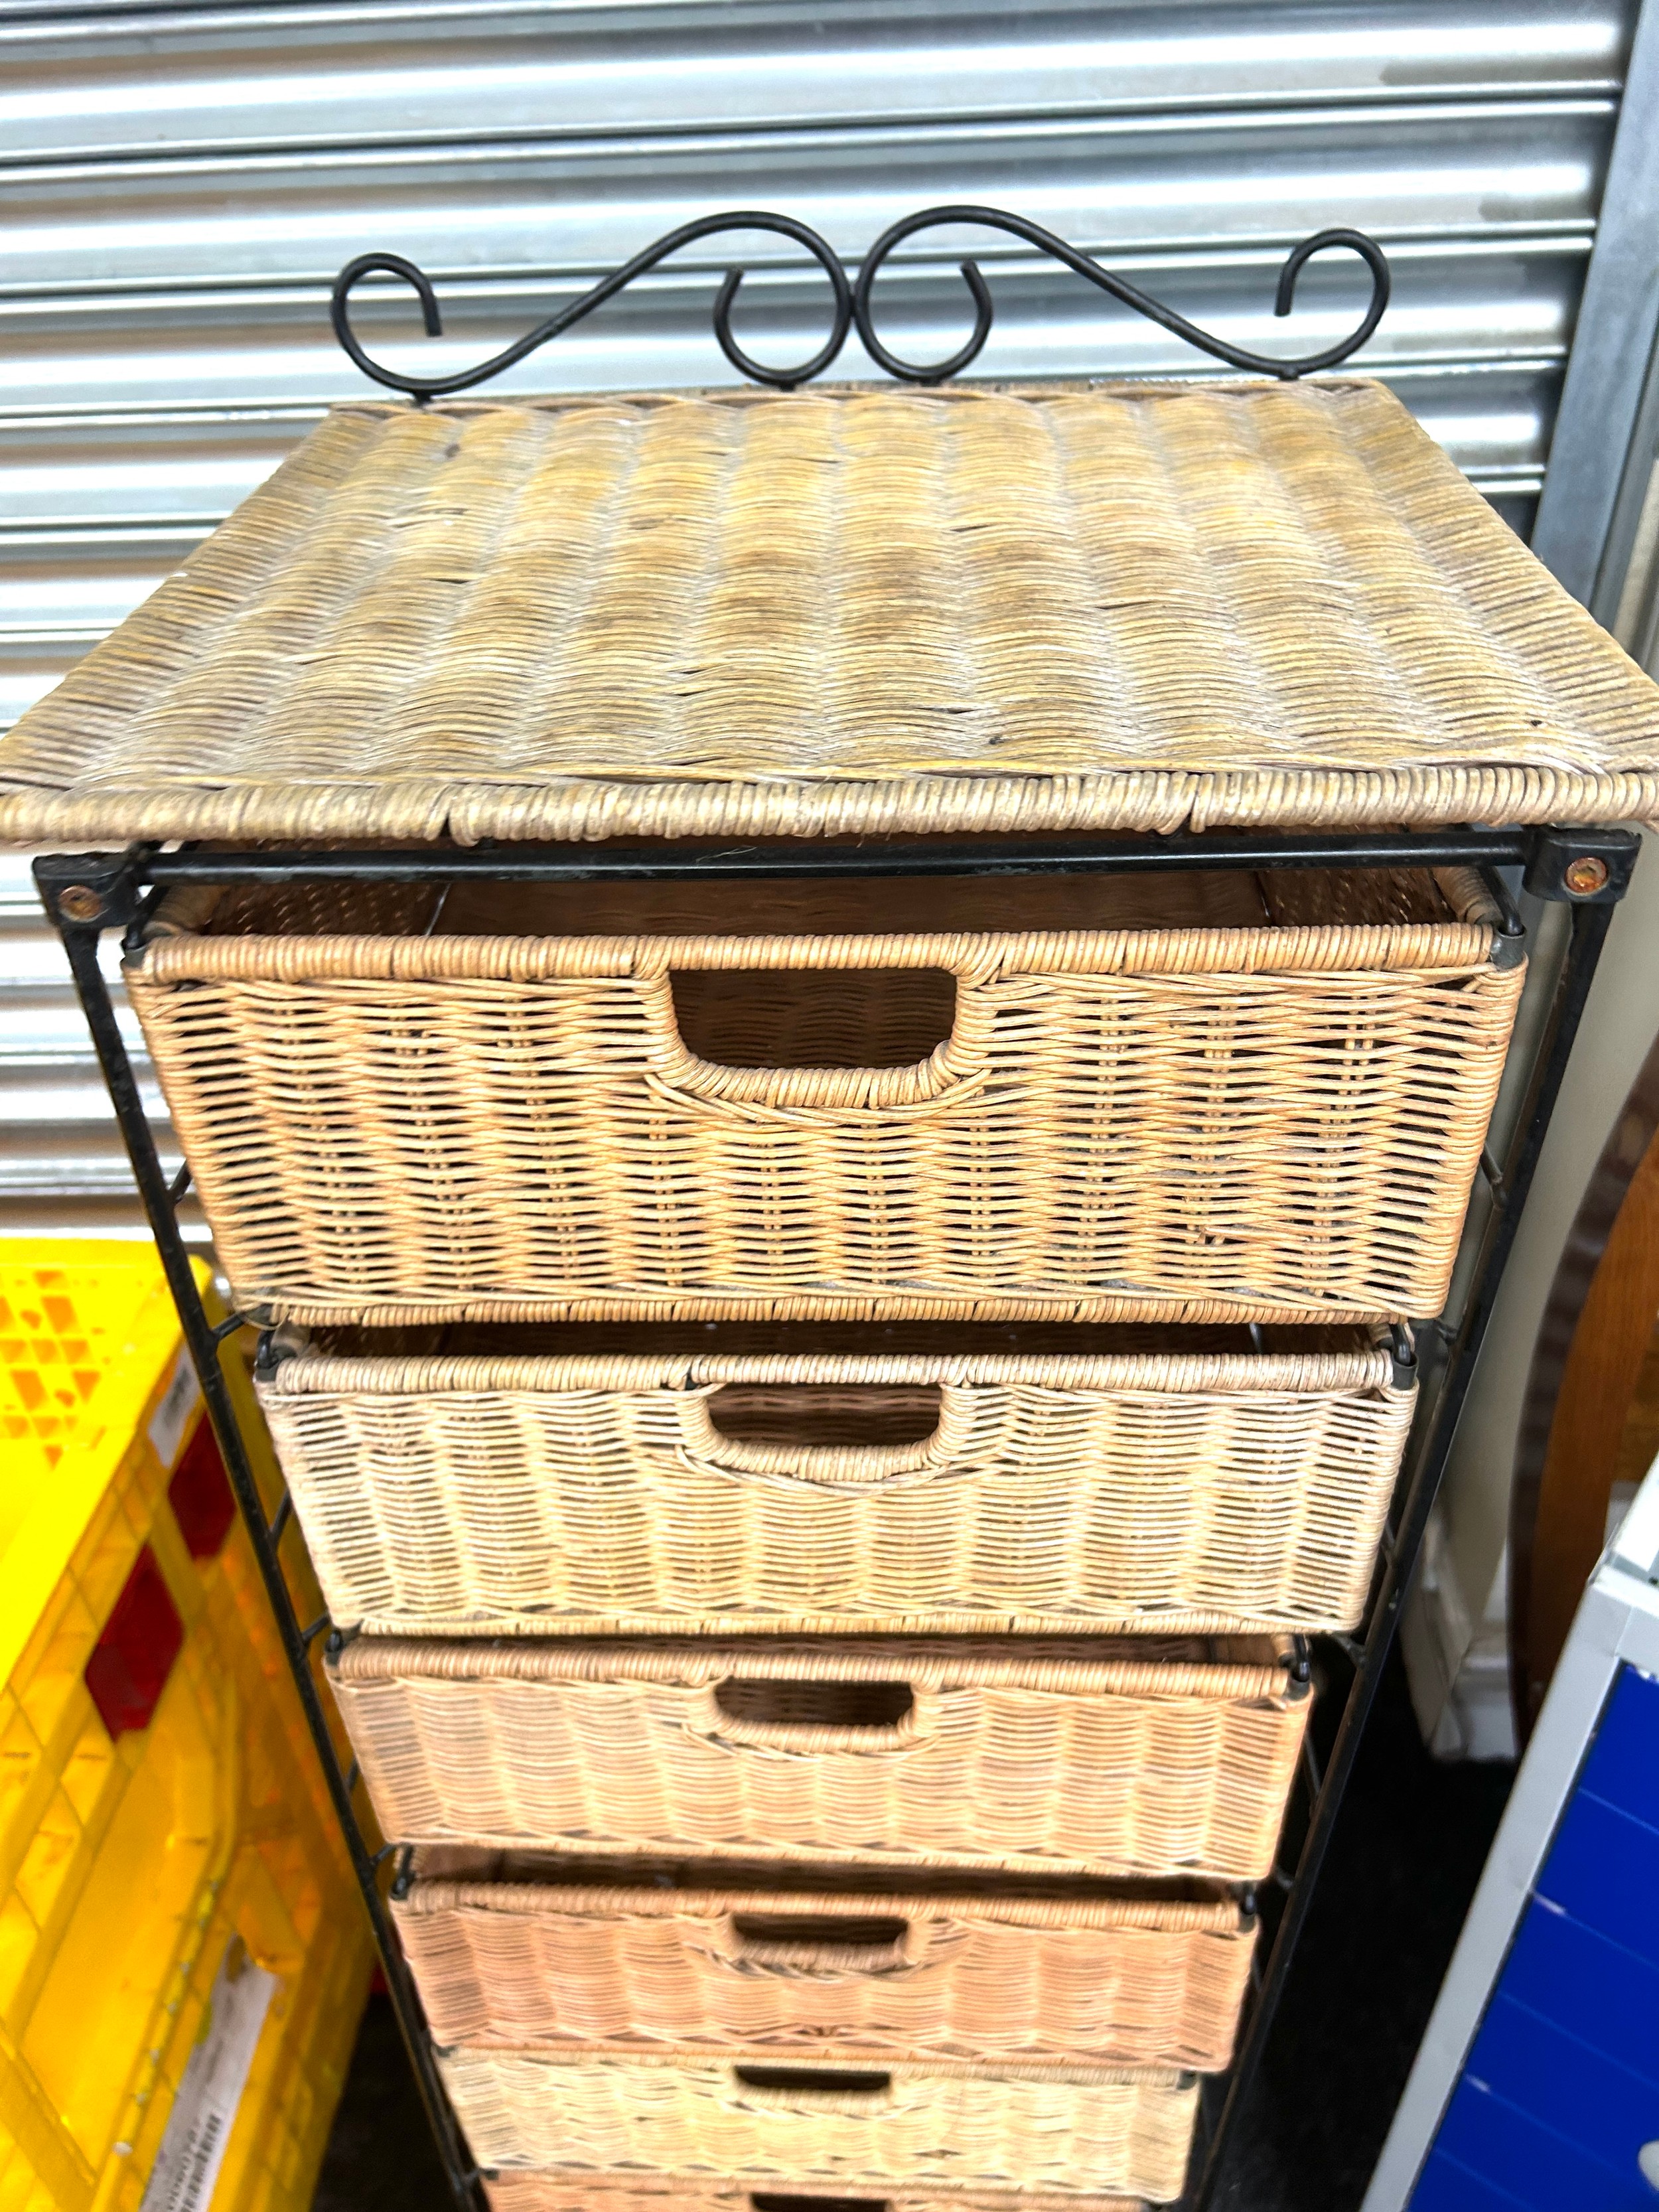 9 drawer metal and wicker storage drawers measures approx 59 inches tall by 16 inches wide and 14 - Image 2 of 3